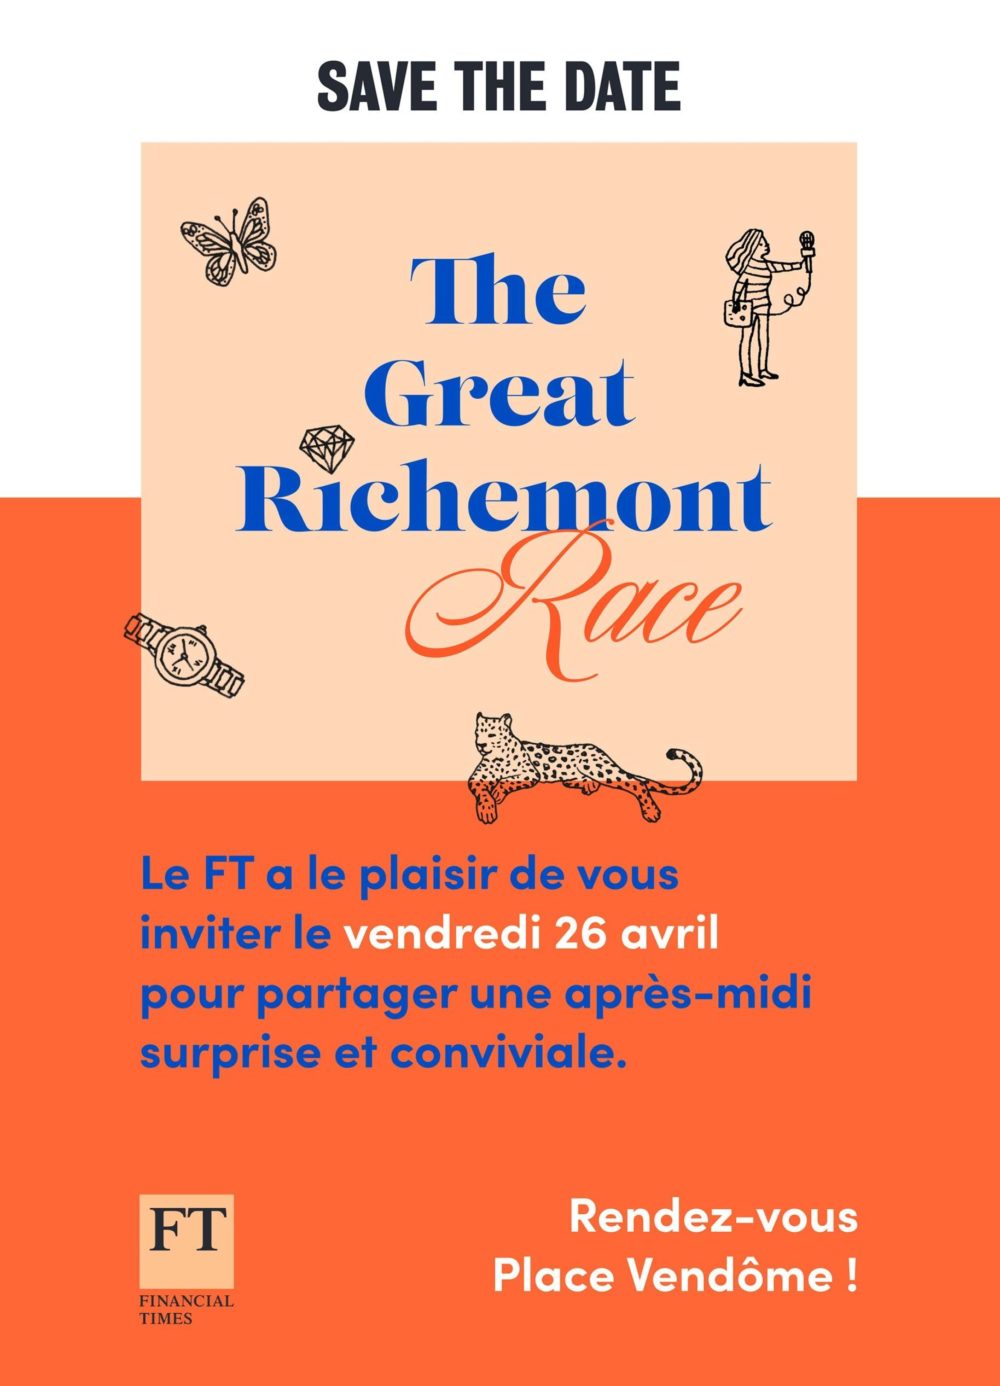 Financial Times - The Great Richmont Race - save the date